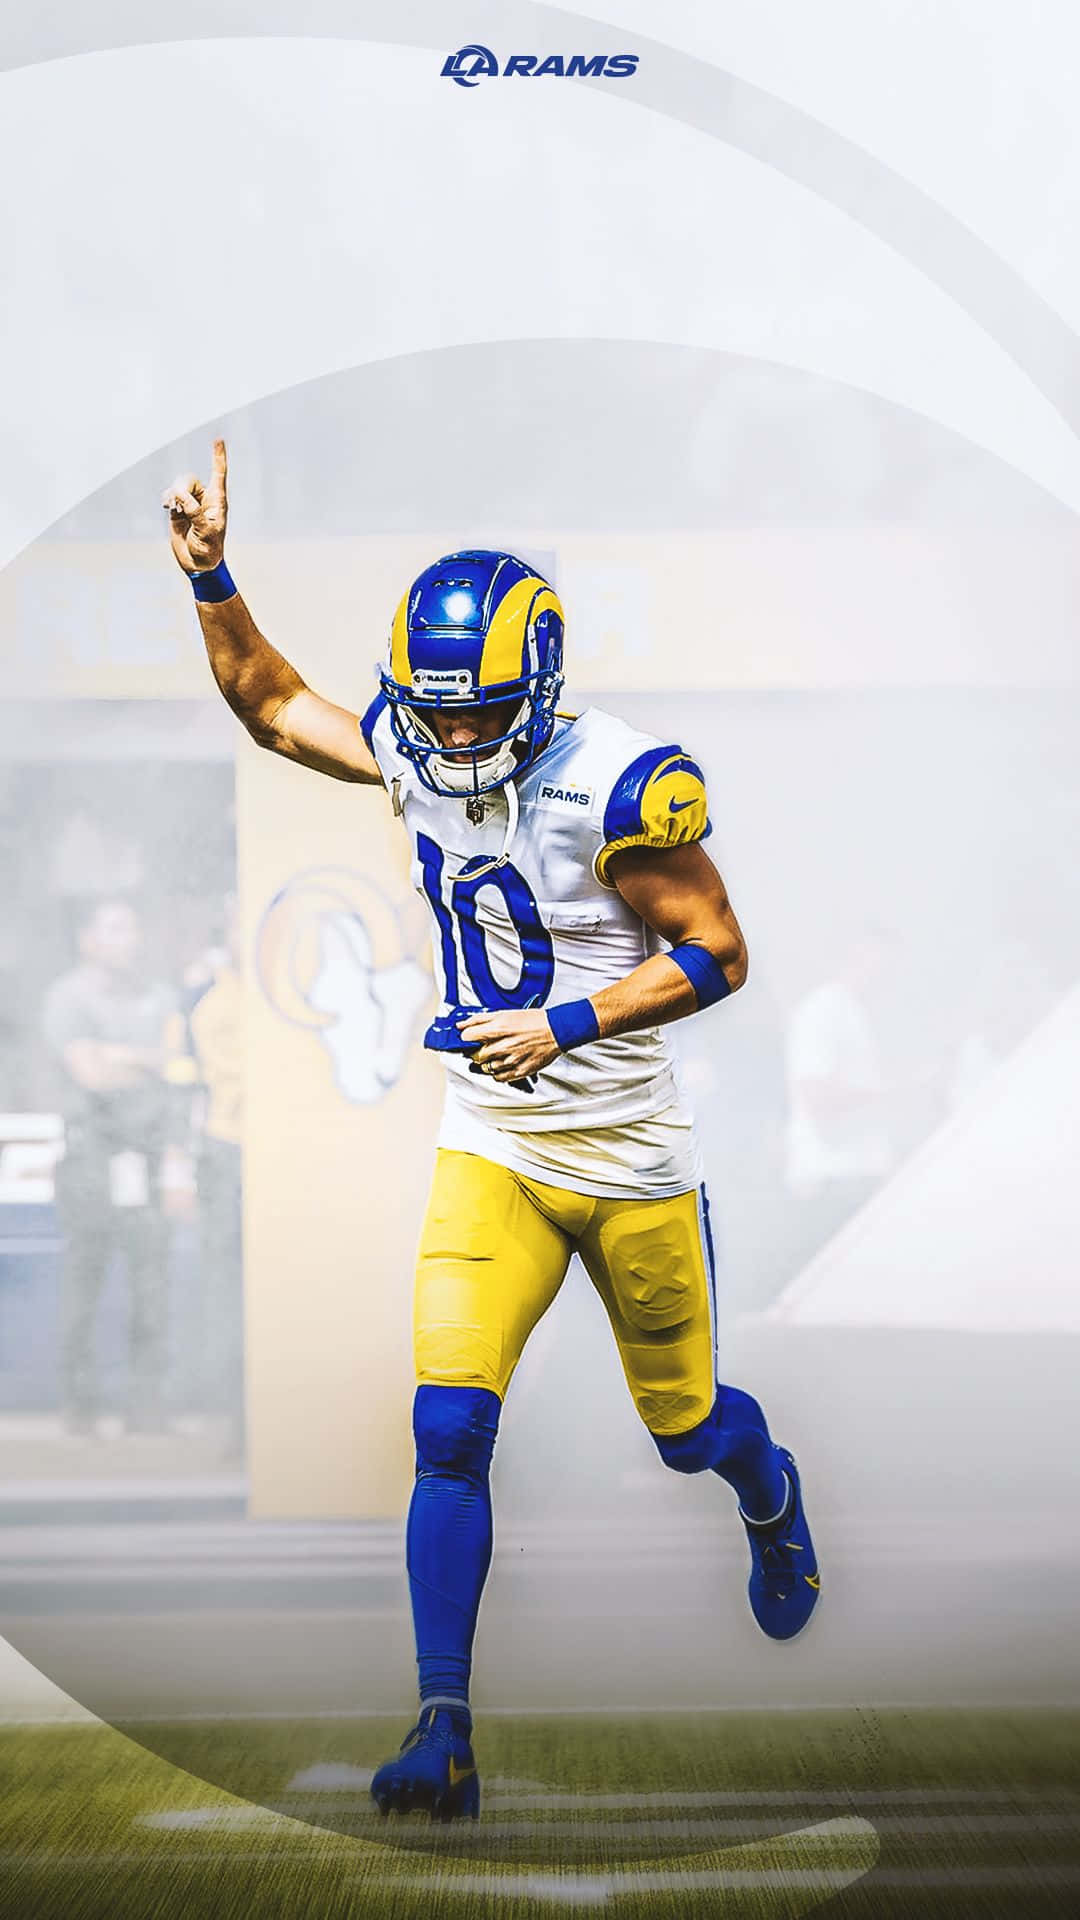 Bring your world to life with Rams Iphone Wallpaper